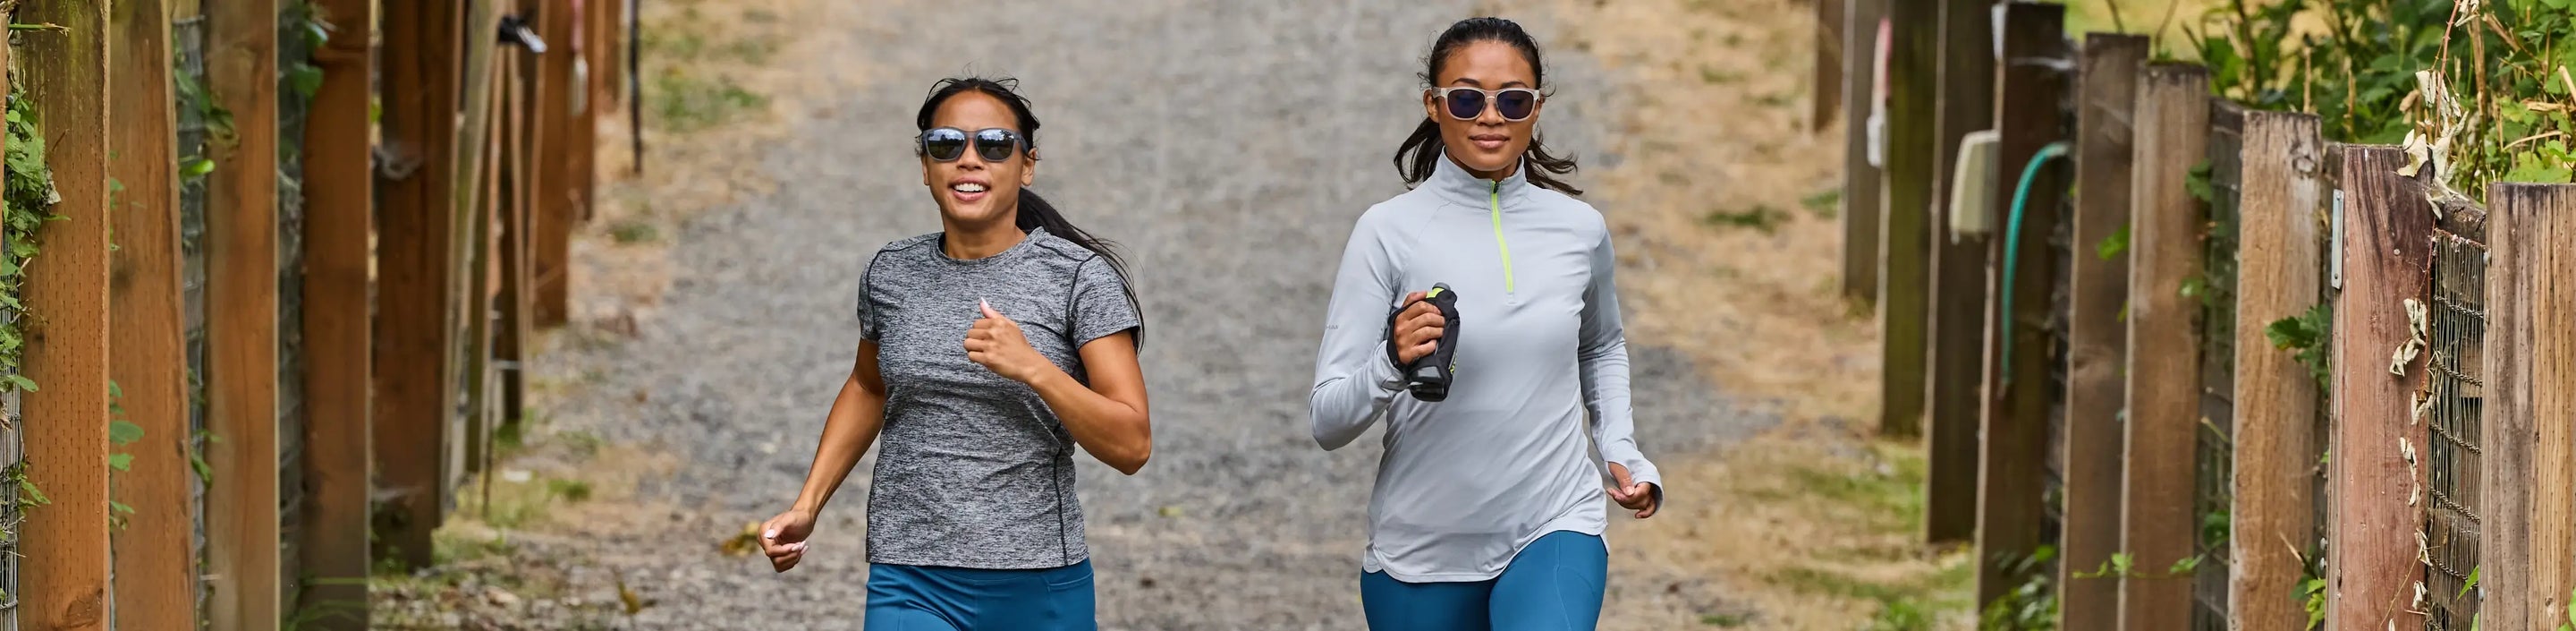 two running on a path in Nathan Sports running apparel and sunglasses